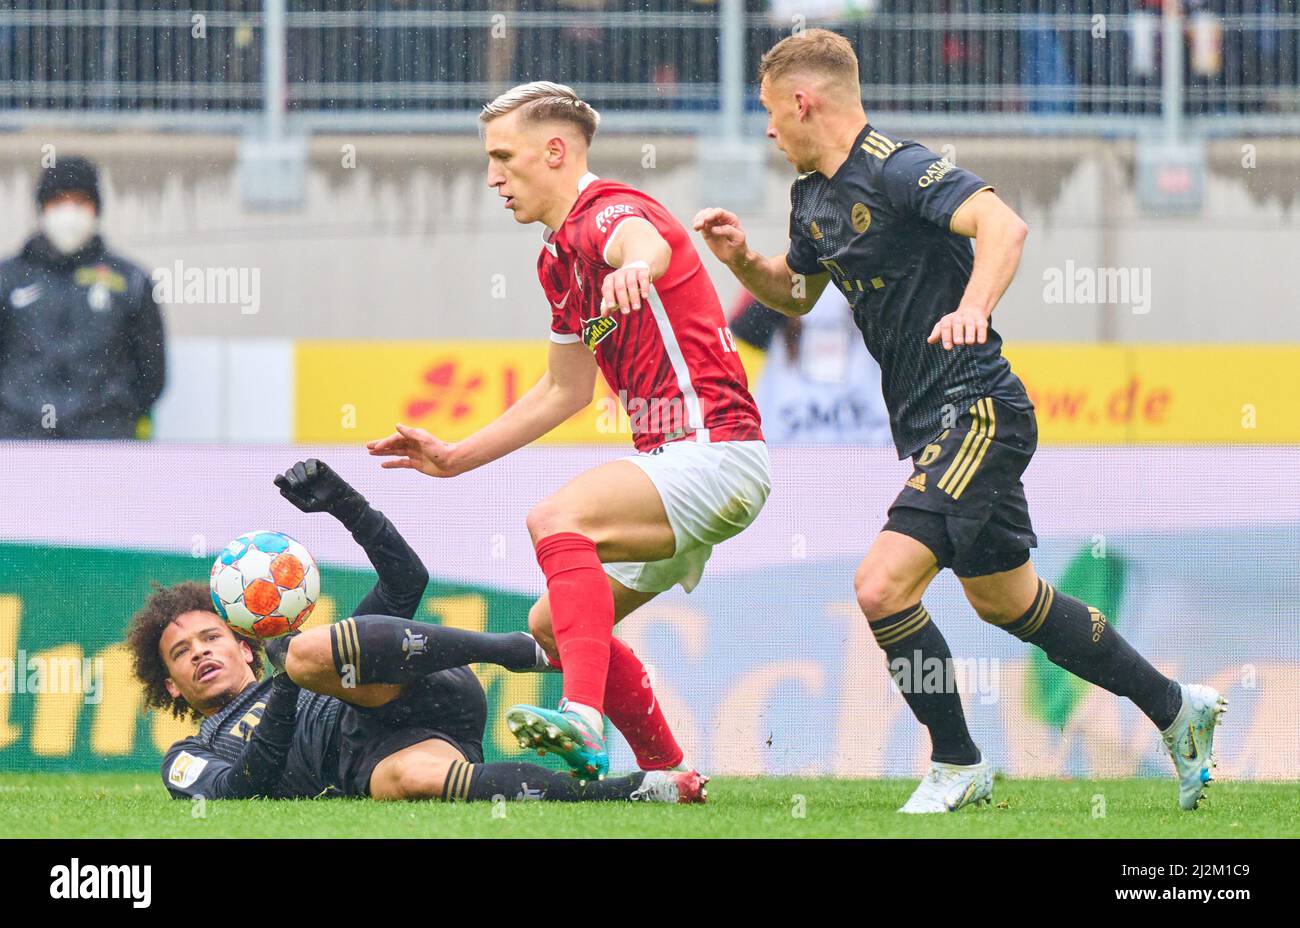 Freiburg, Germany. 02nd Apr, 2022. Leroy SANE, FCB 10 Joshua KIMMICH, FCB 6   compete for the ball, tackling, duel, header, zweikampf, action, fight against Nico Schlotterbeck, FRG 4  in the match SC FREIBURG - FC BAYERN MÜNCHEN 1-4 1.German Football League on April 2, 2022 in Freiburg, Germany. Season 2021/2022, matchday 28, 1.Bundesliga, FCB, München, 28.Spieltag. FCB, © Peter Schatz / Alamy Live News    - DFL REGULATIONS PROHIBIT ANY USE OF PHOTOGRAPHS as IMAGE SEQUENCES and/or QUASI-VIDEO - Credit: Peter Schatz/Alamy Live News Stock Photo